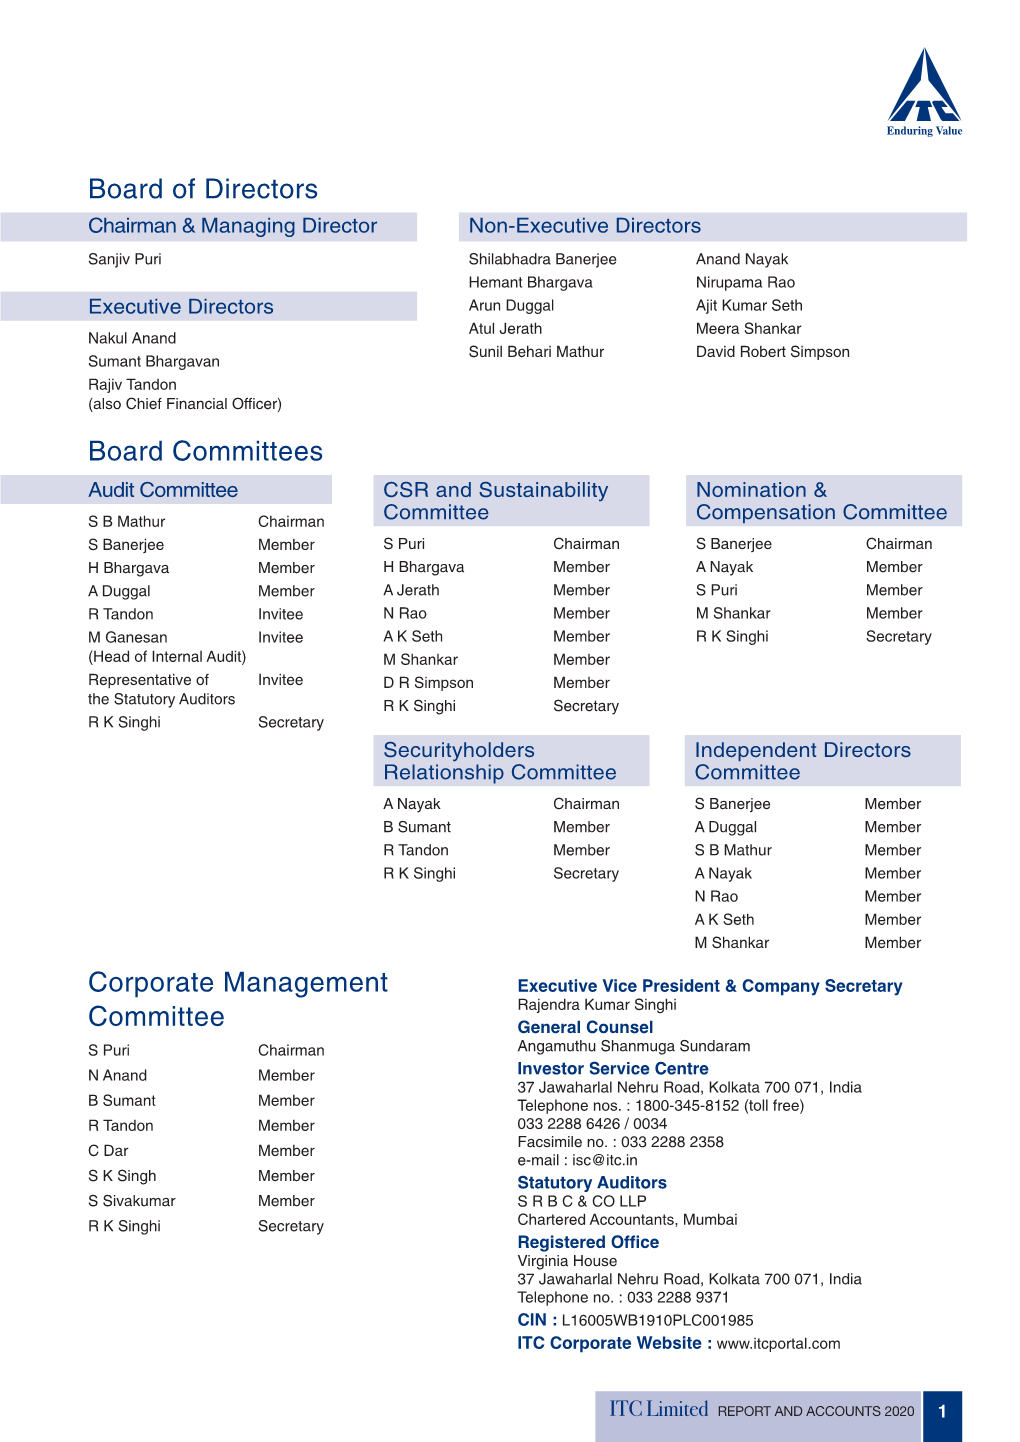 Board of Directors and Committees